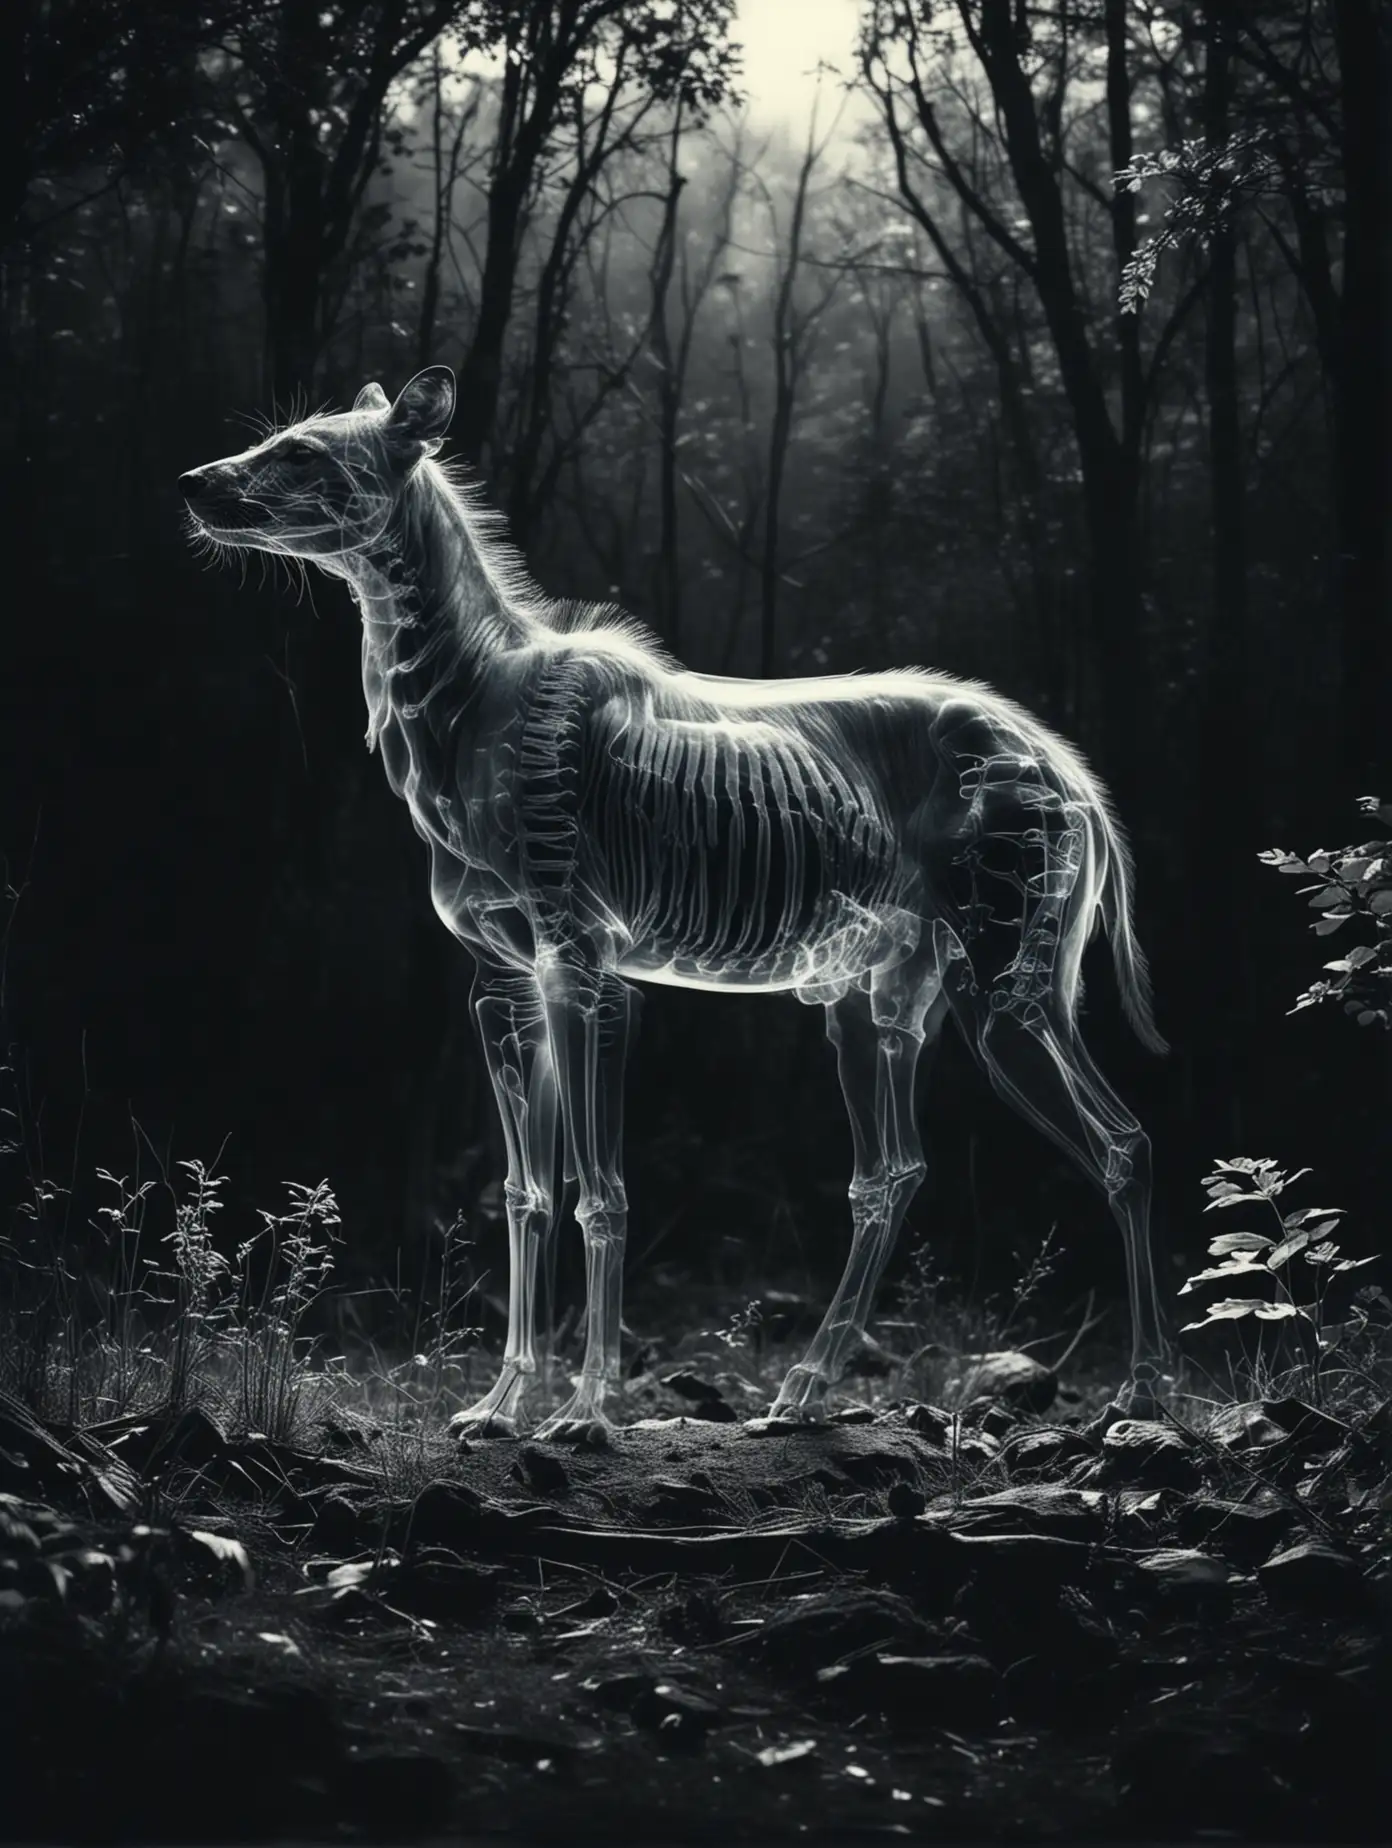 X-ray of a wild animal against a dark background of nature. Realistic, film effect